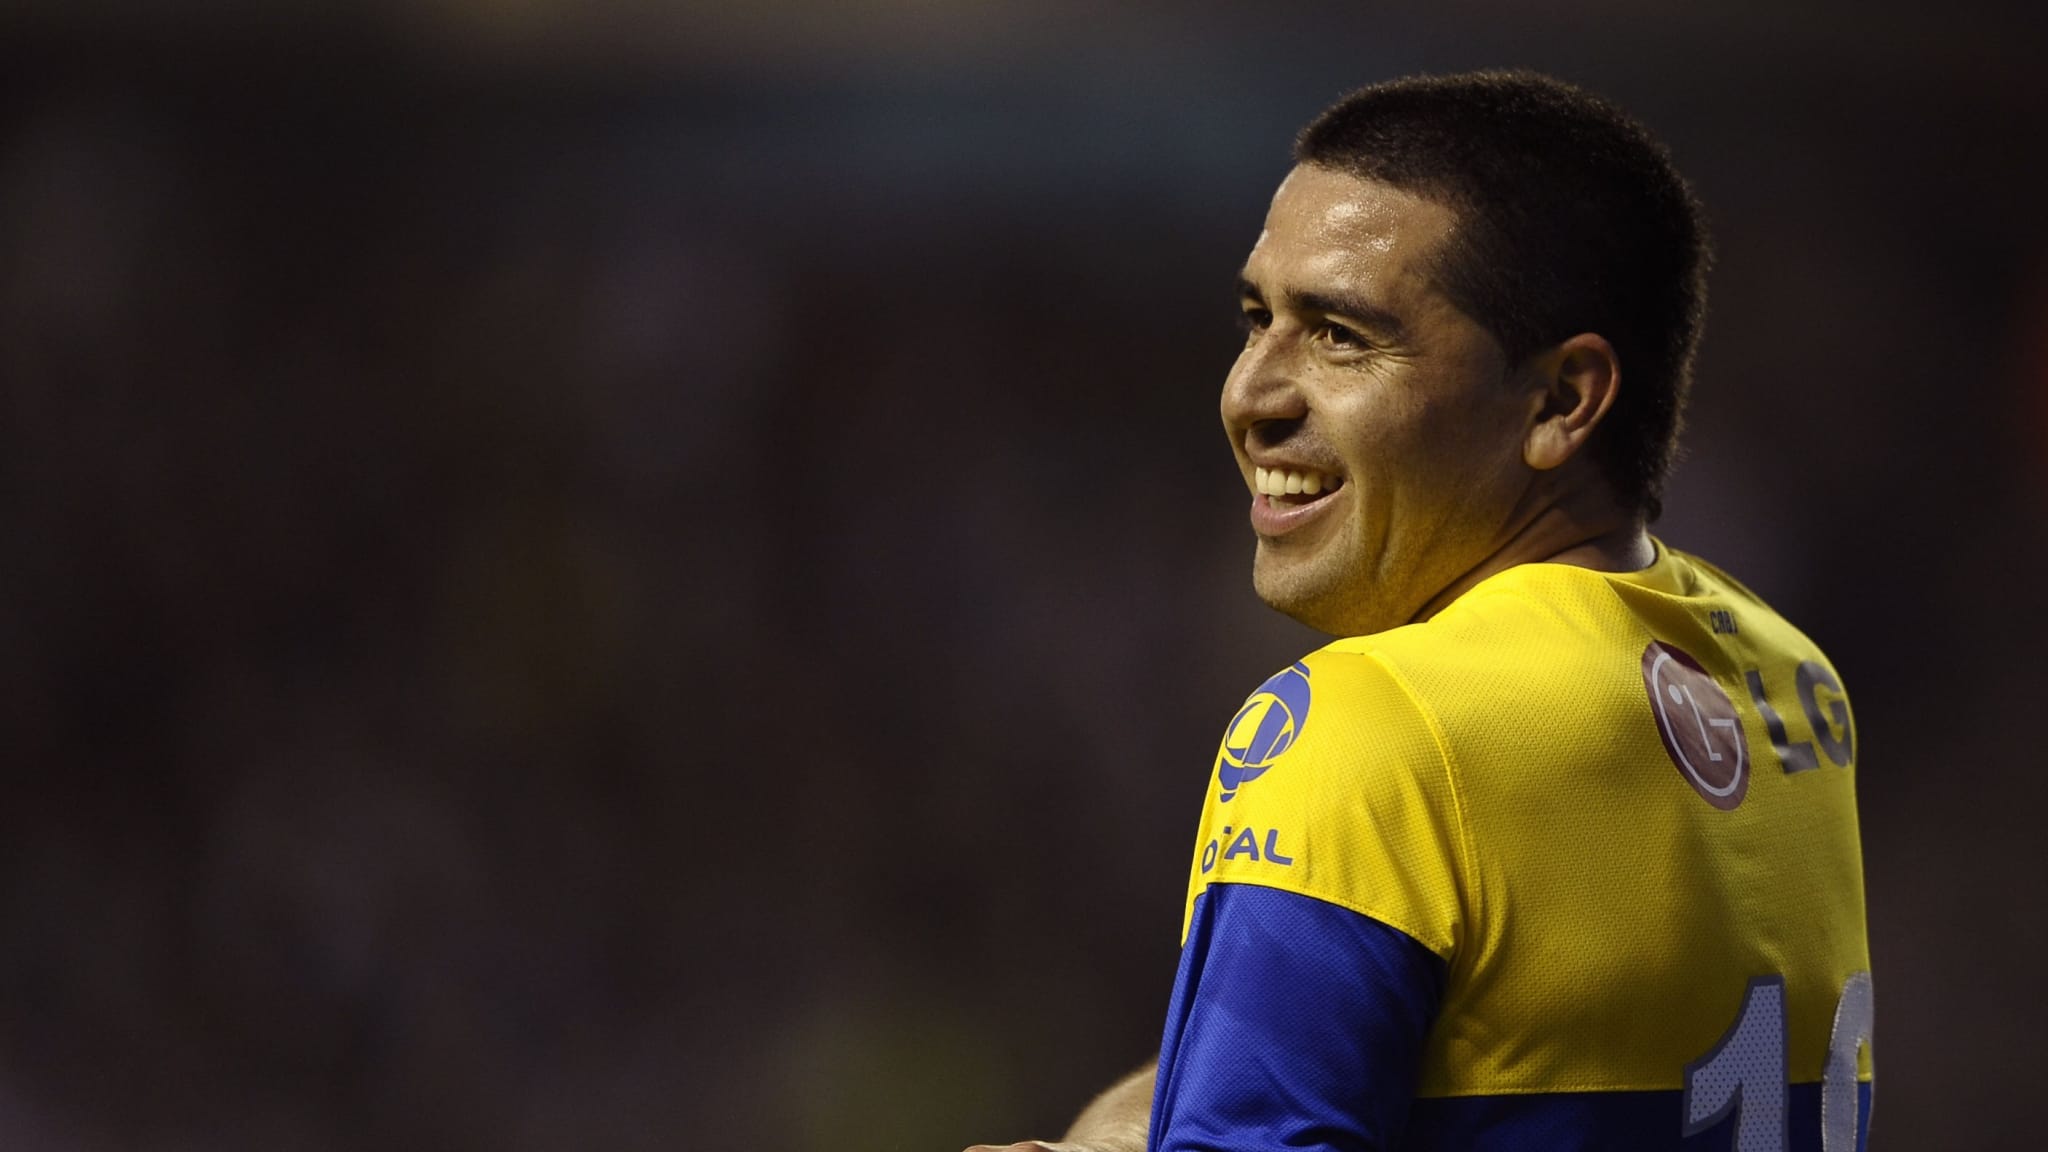 Football Has Given Me Everything - Riquelme , HD Wallpaper & Backgrounds